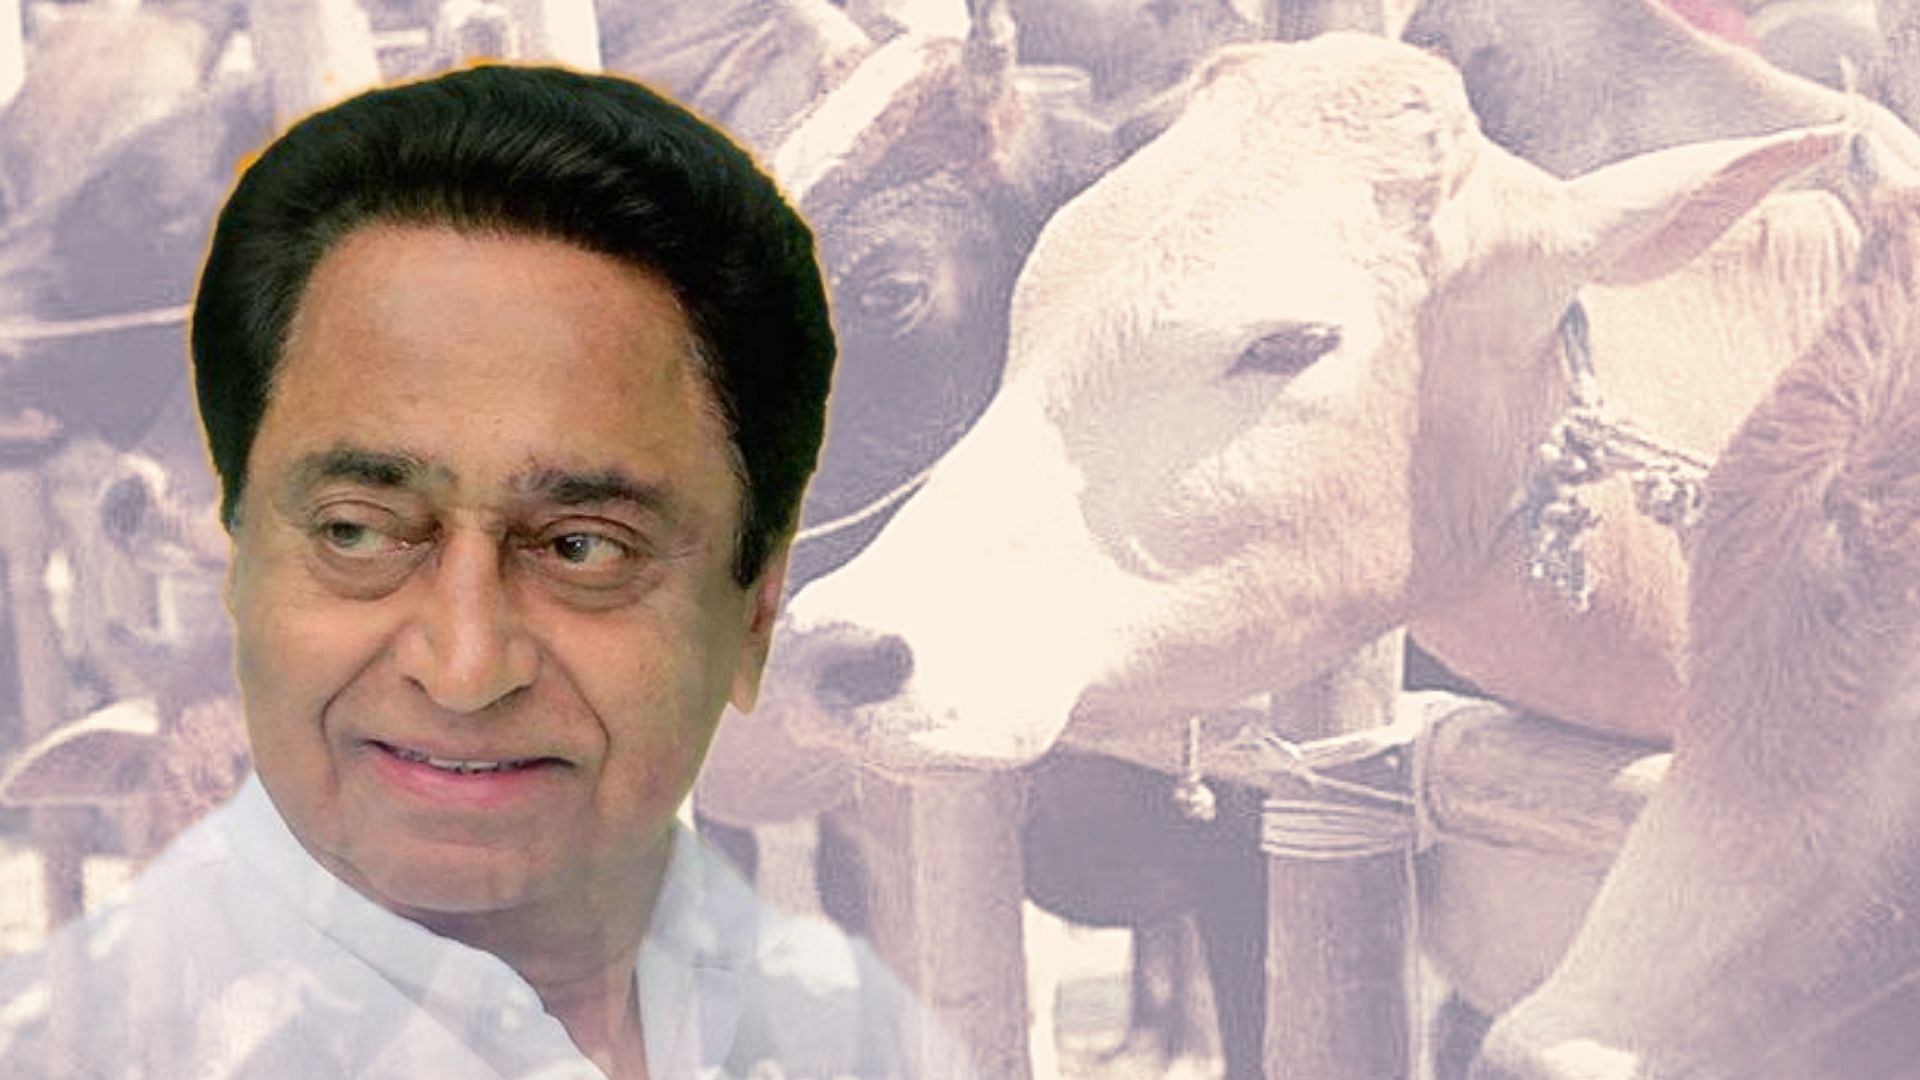 The Madhya Pradesh government will set up 1,000 ‘gaushalas’ or cow shelters in the state in the next four months.